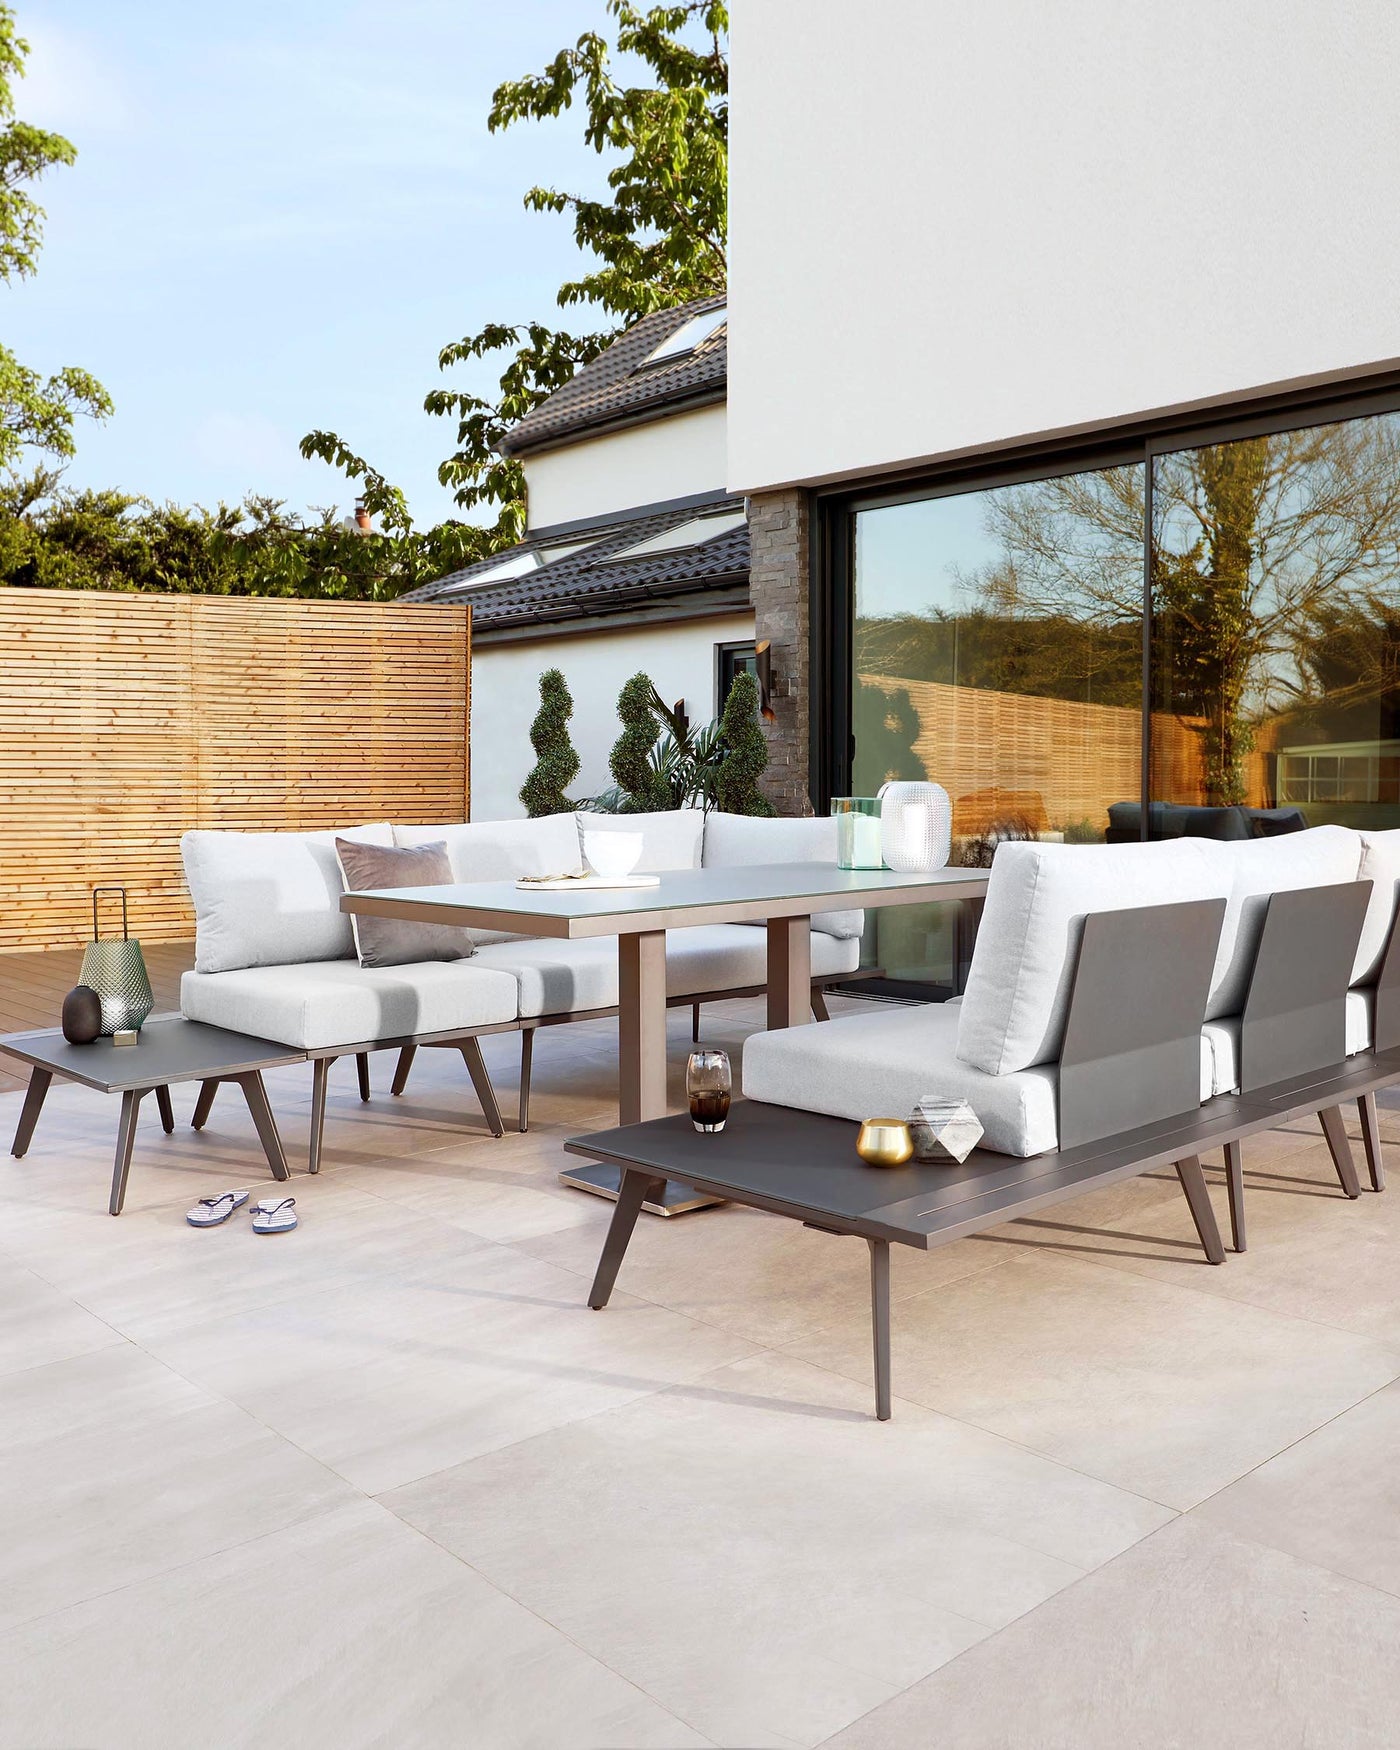 Modern outdoor patio furniture set featuring a rectangular dining table with a dark wood finish, accompanied by six contemporary style chairs with grey cushioned seats and backs. Two matching benches provide additional seating. A low-profile coffee table coordinates with the set, all arranged on a light tiled patio. Decorative items, including candles and a small vase, adorn the tables for a cosy ambiance.